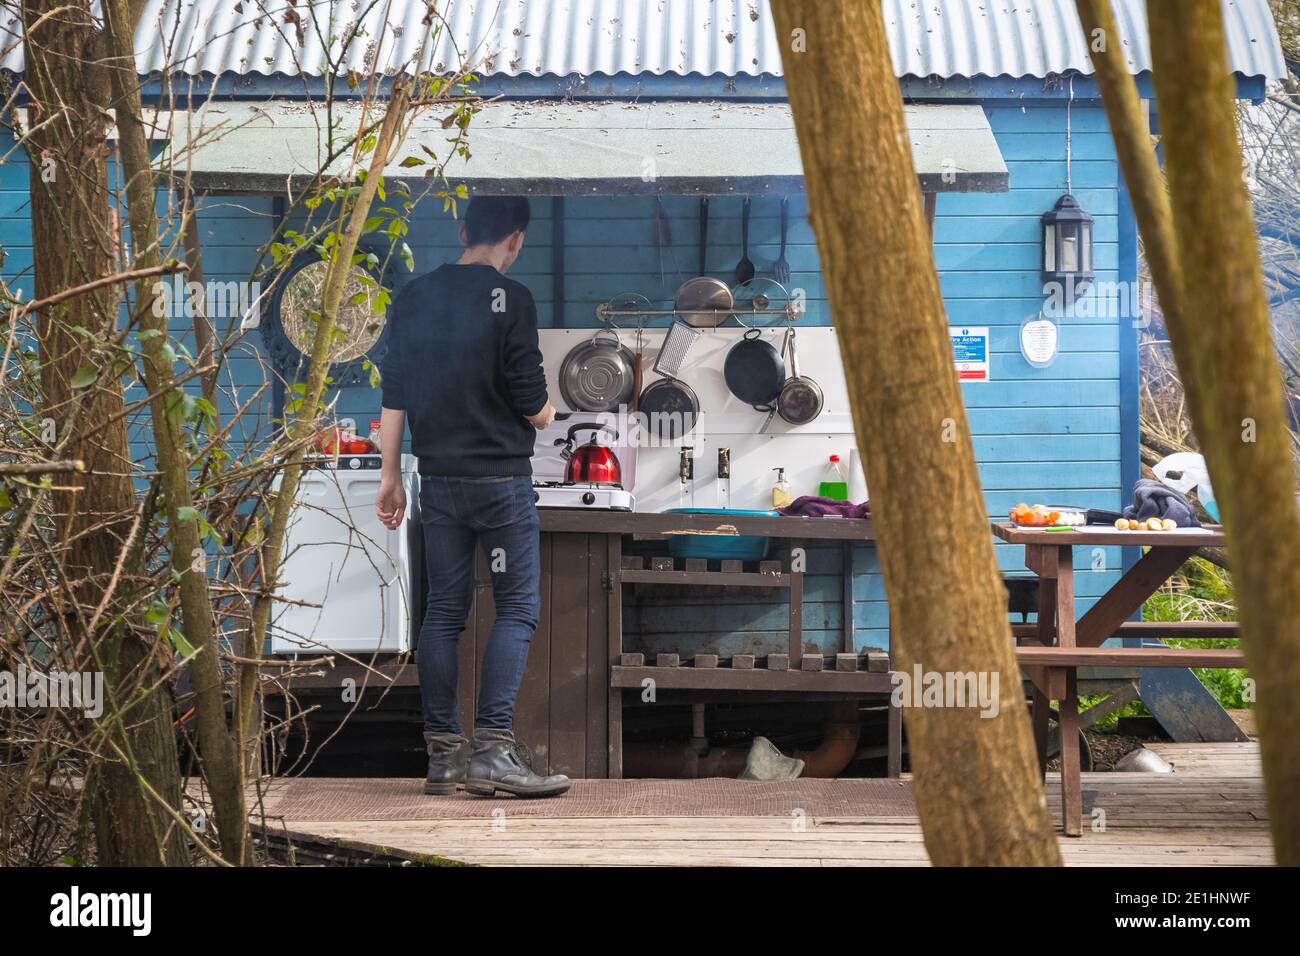 Man cooking with a basic facilities attached with converted train carriage at a camping site in Fairford, Gloucestershire, England Stock Photo